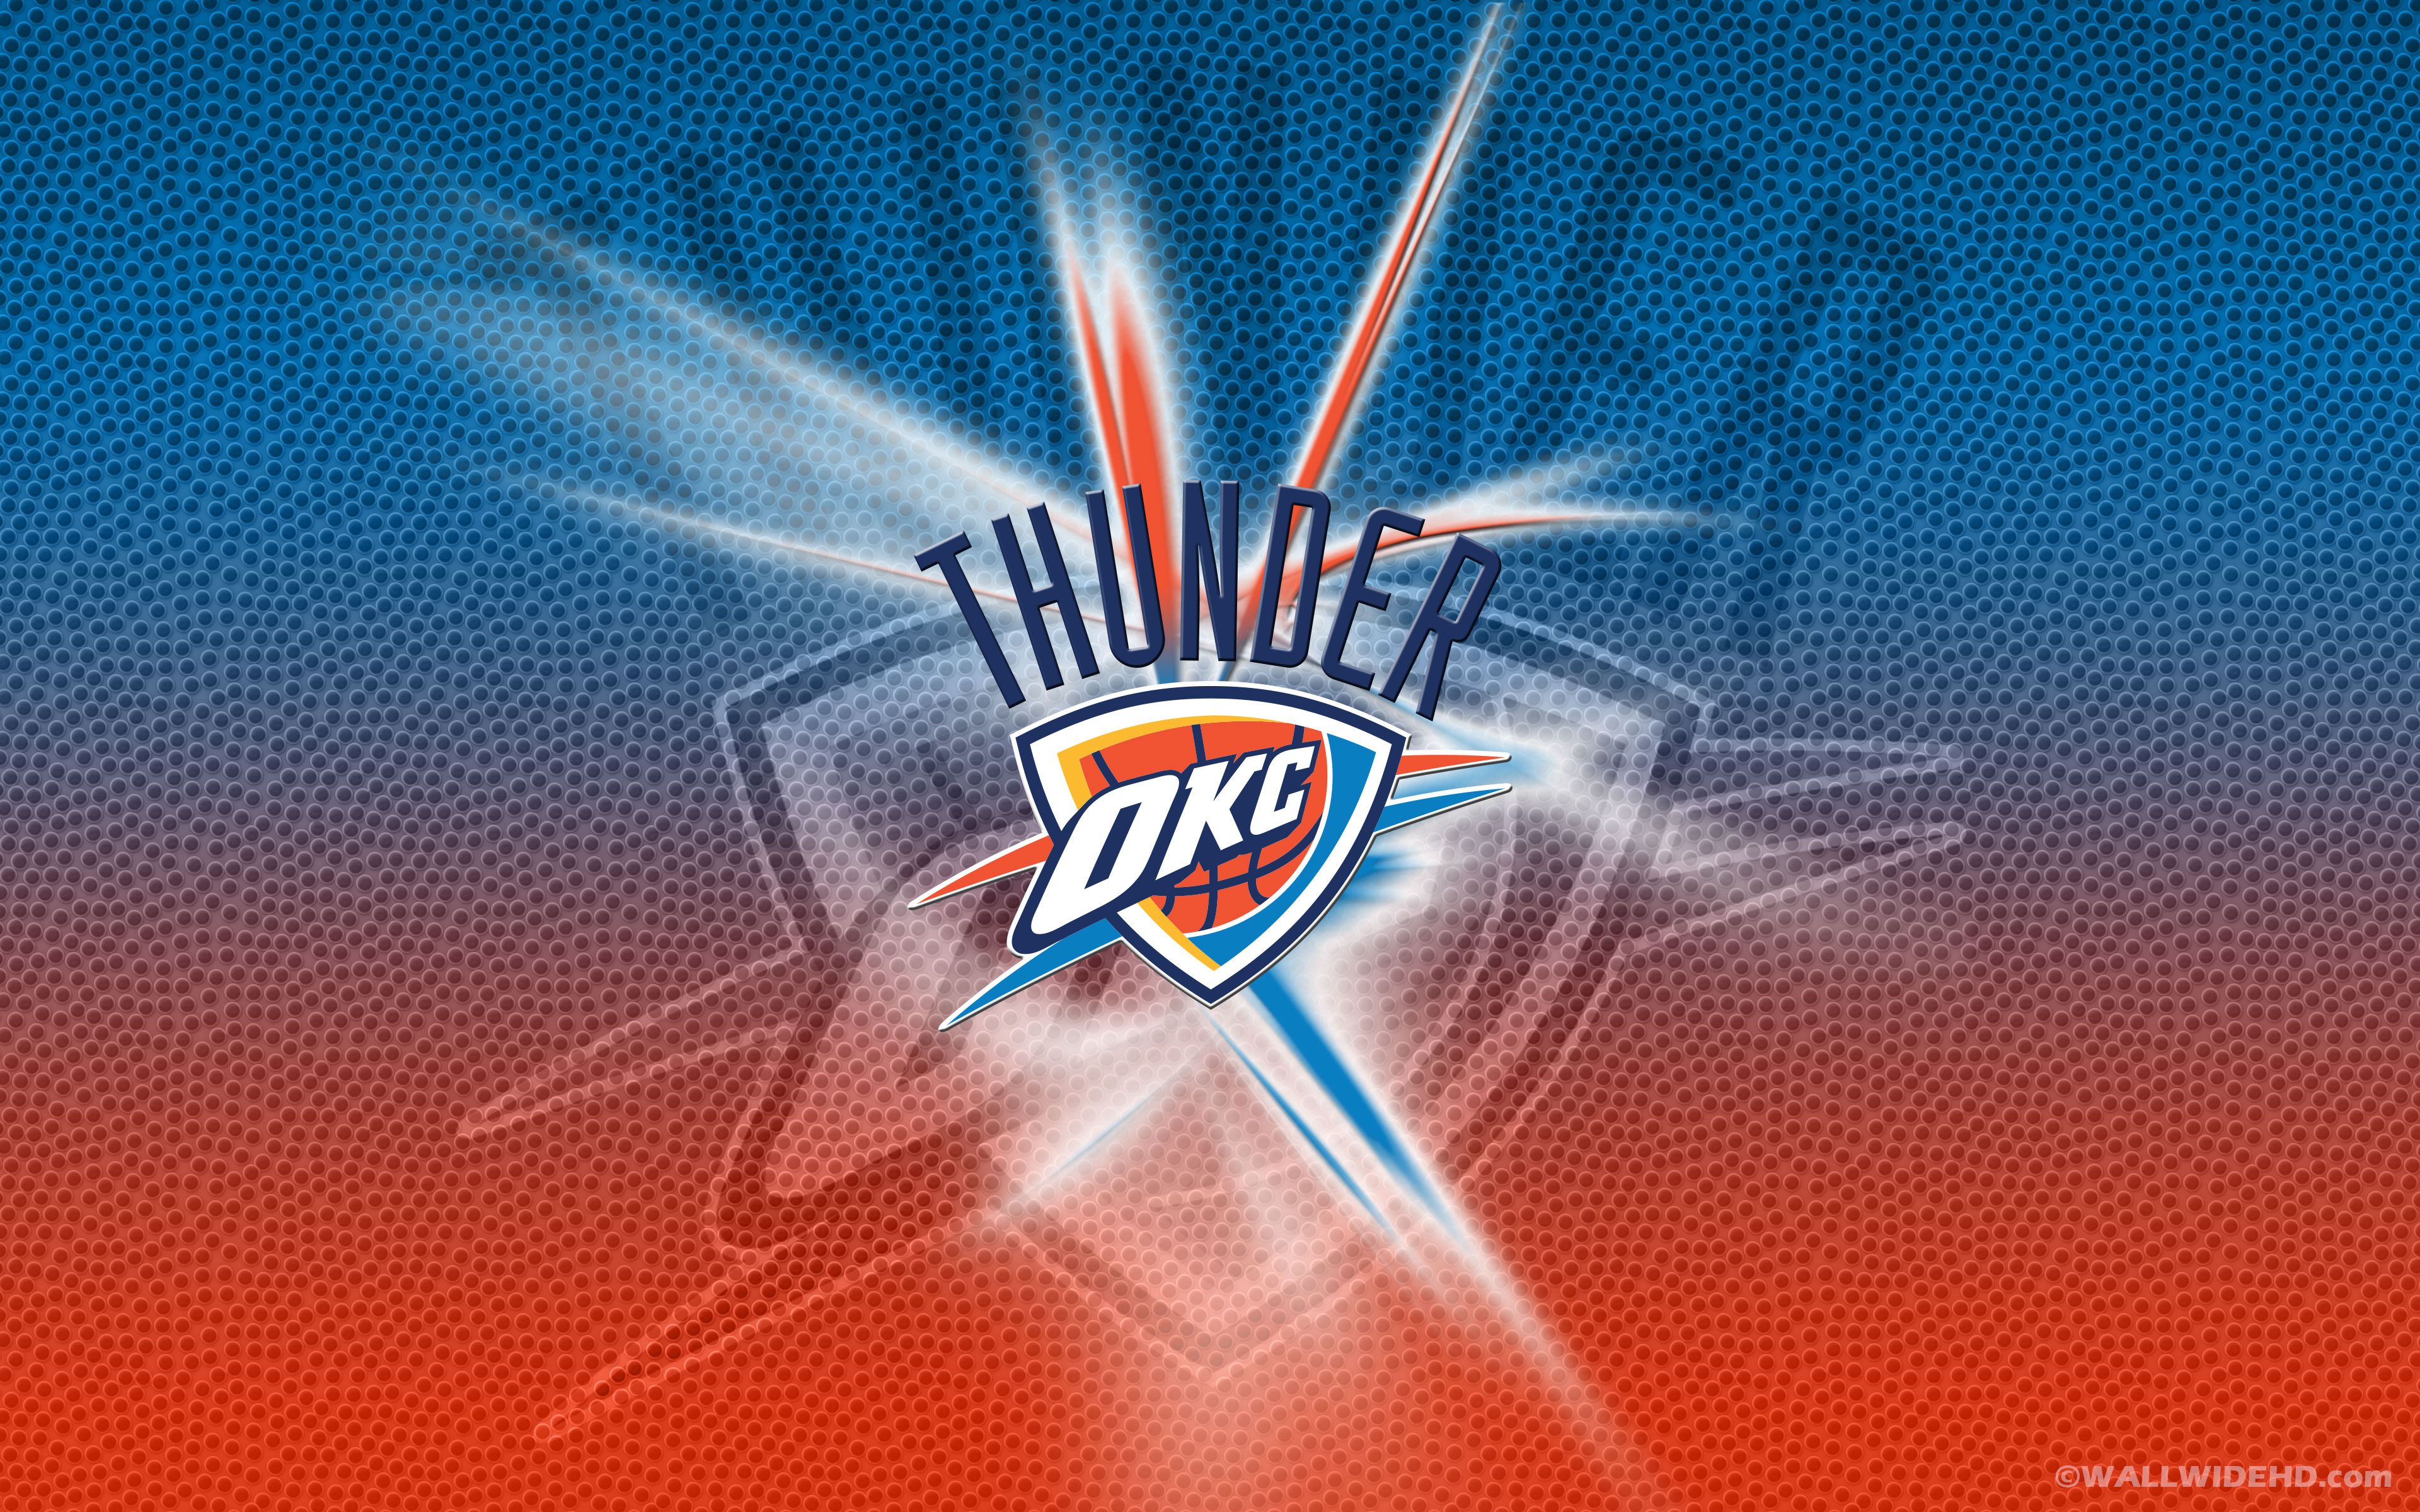 30+ Oklahoma City Thunder Wallpapers by Eir Lewton, GoldWallpapers.